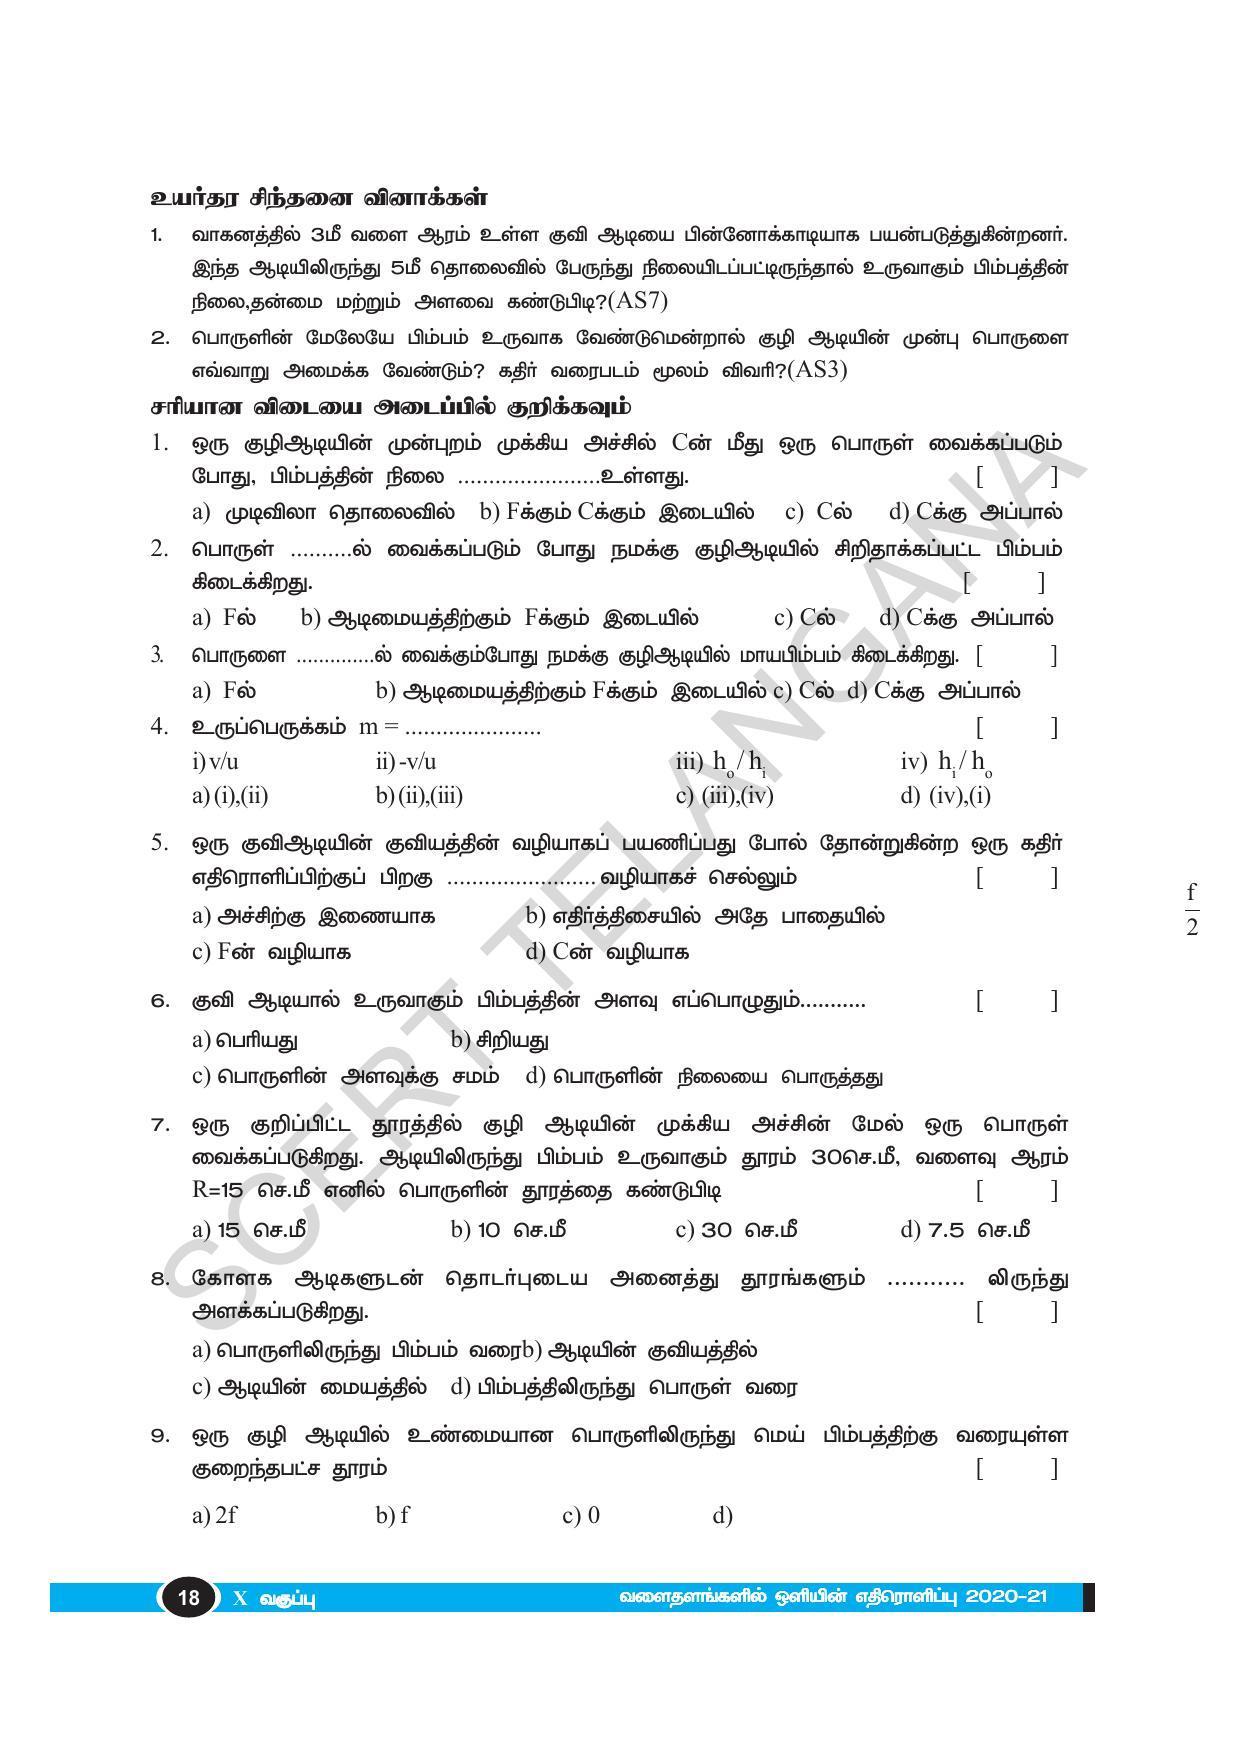 TS SCERT Class 10 Physical Science(Tamil Medium) Text Book - Page 30